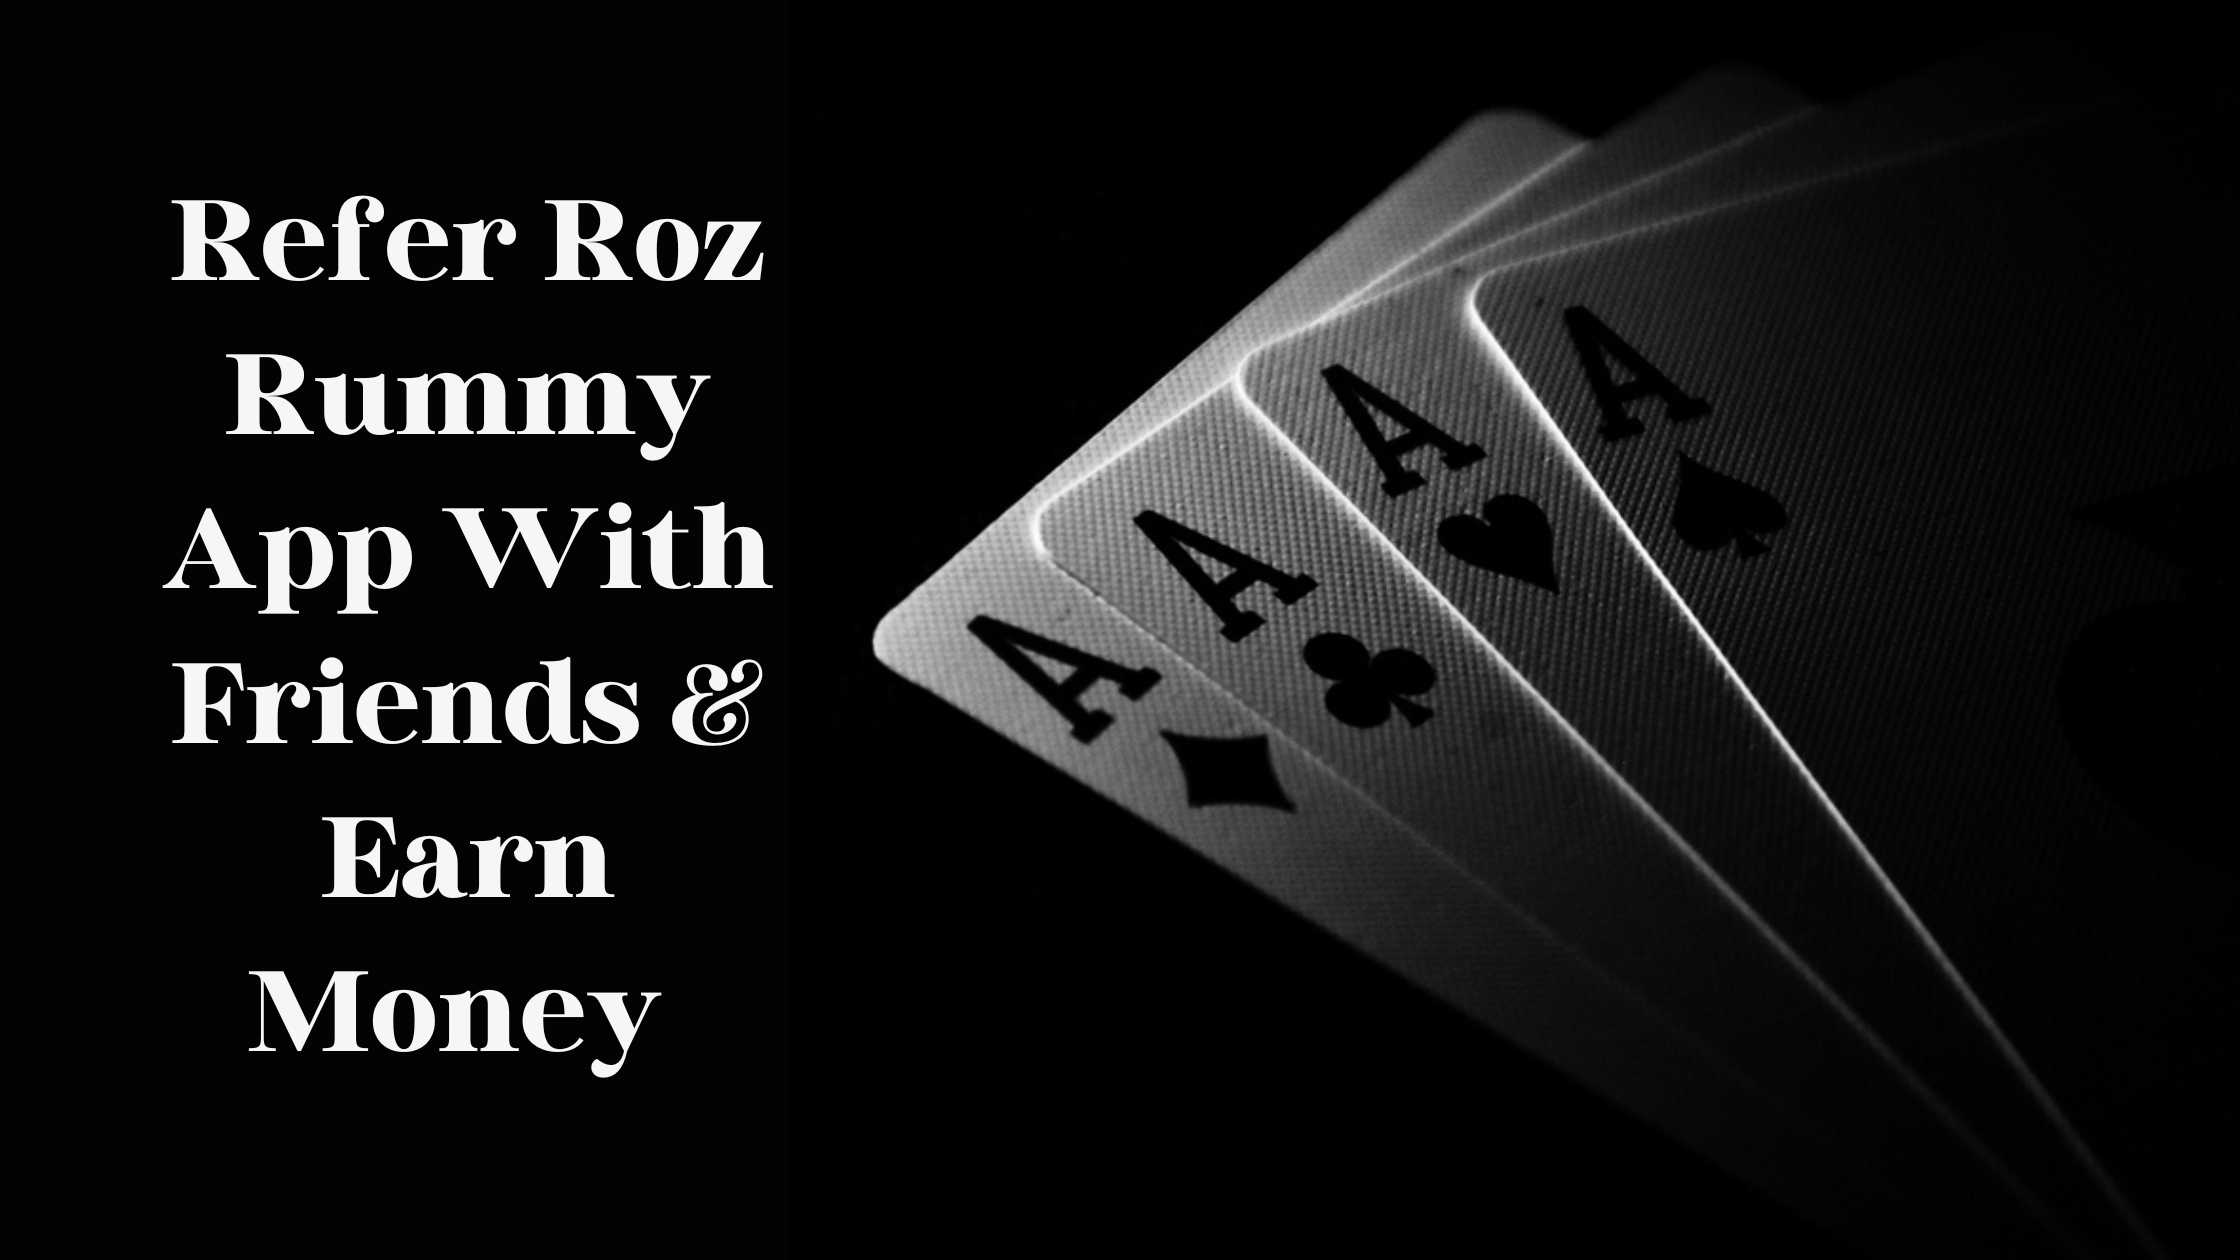 Refer Roz Rummy App With Friends & Earn Money